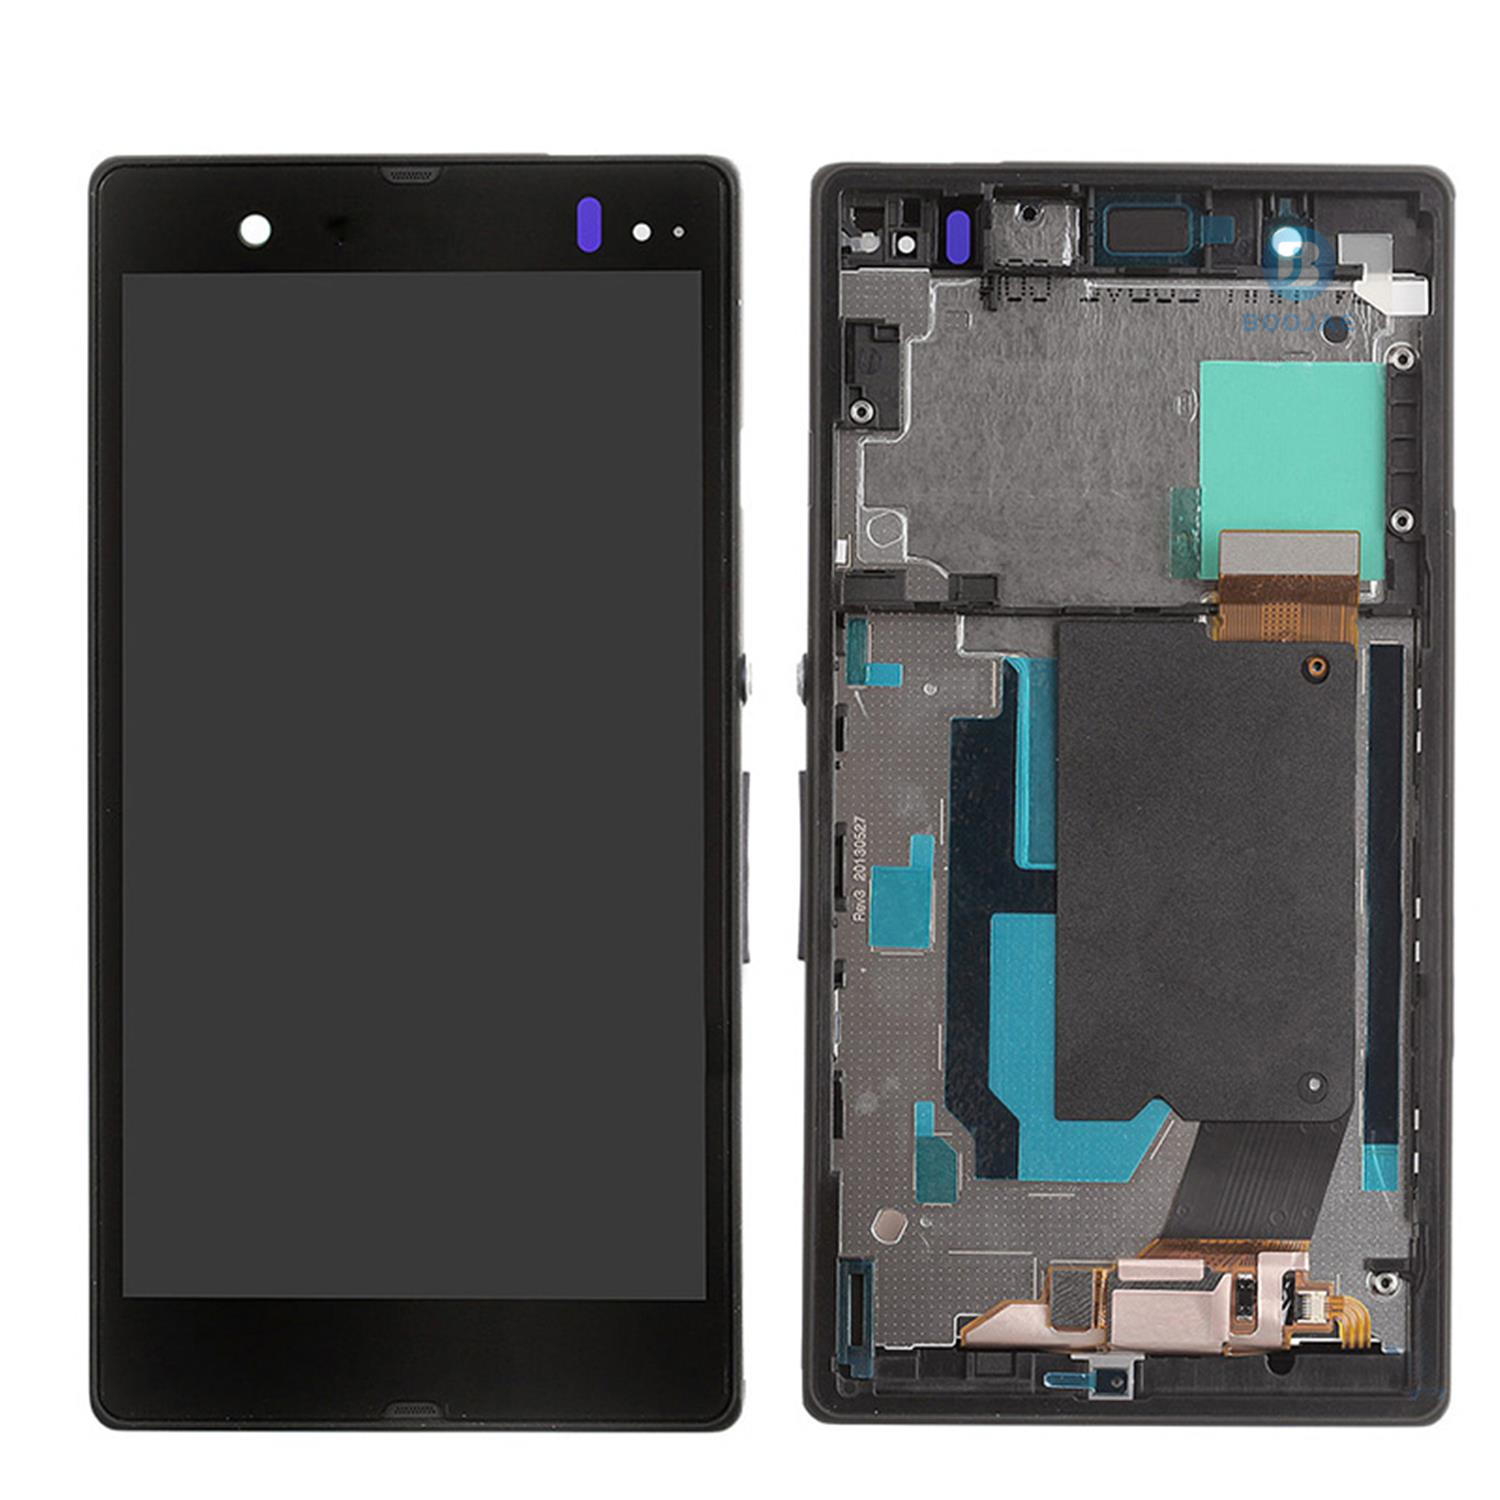 For Sony Xperia Z LCD Screen Display and Touch Panel Digitizer Assembly Replacement